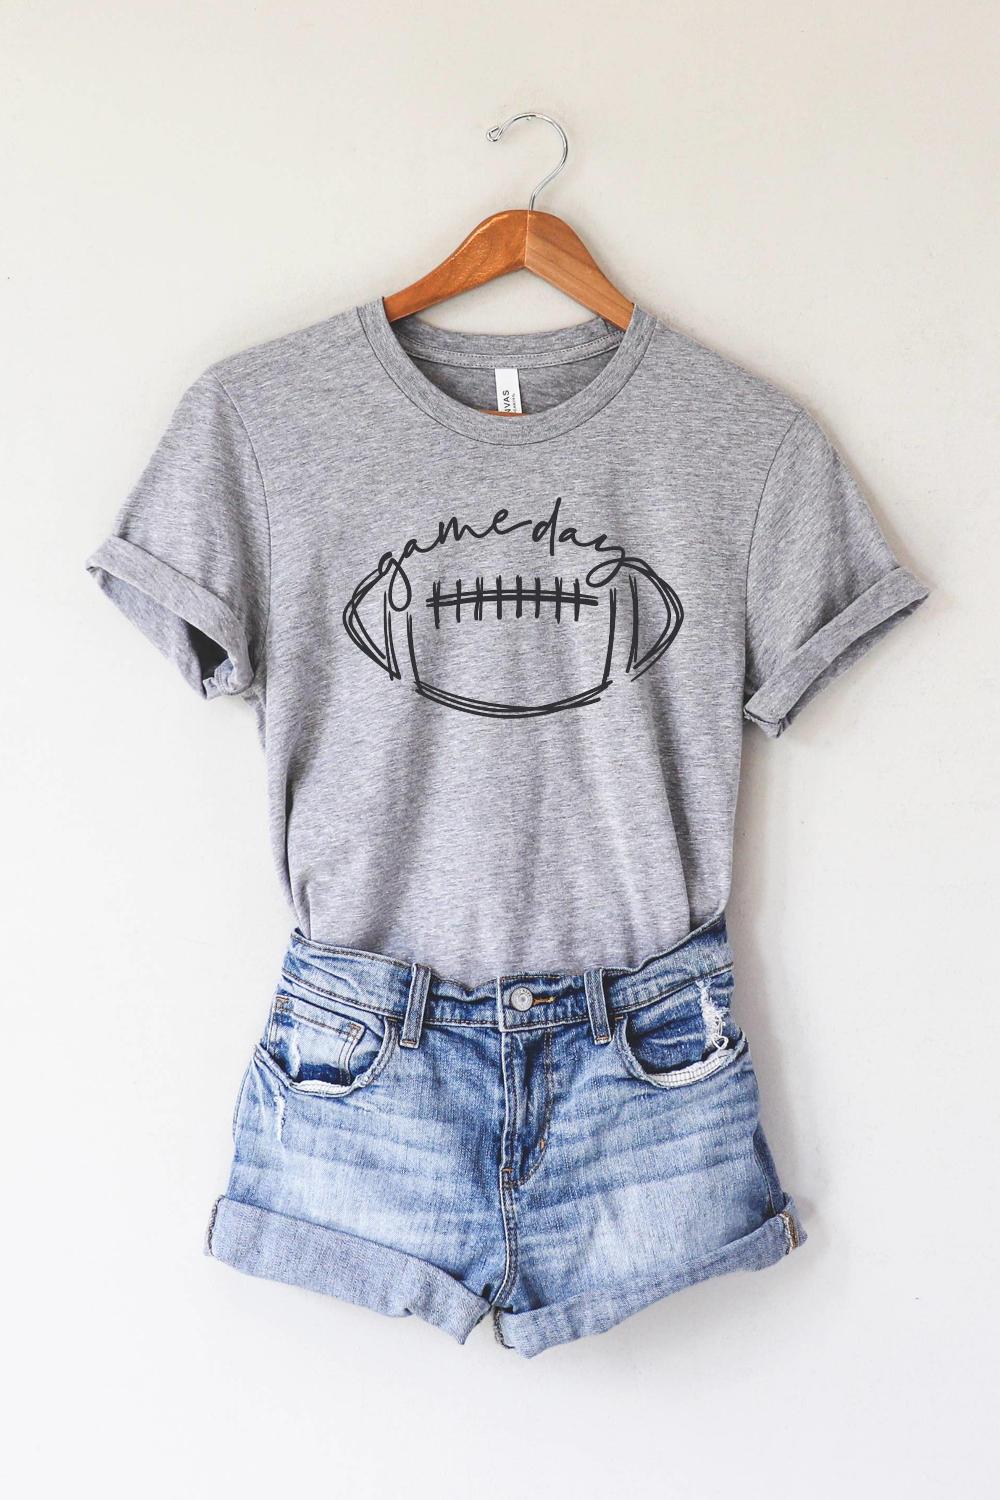 Gameday T-Shirt - Strawberry Moon Boutique